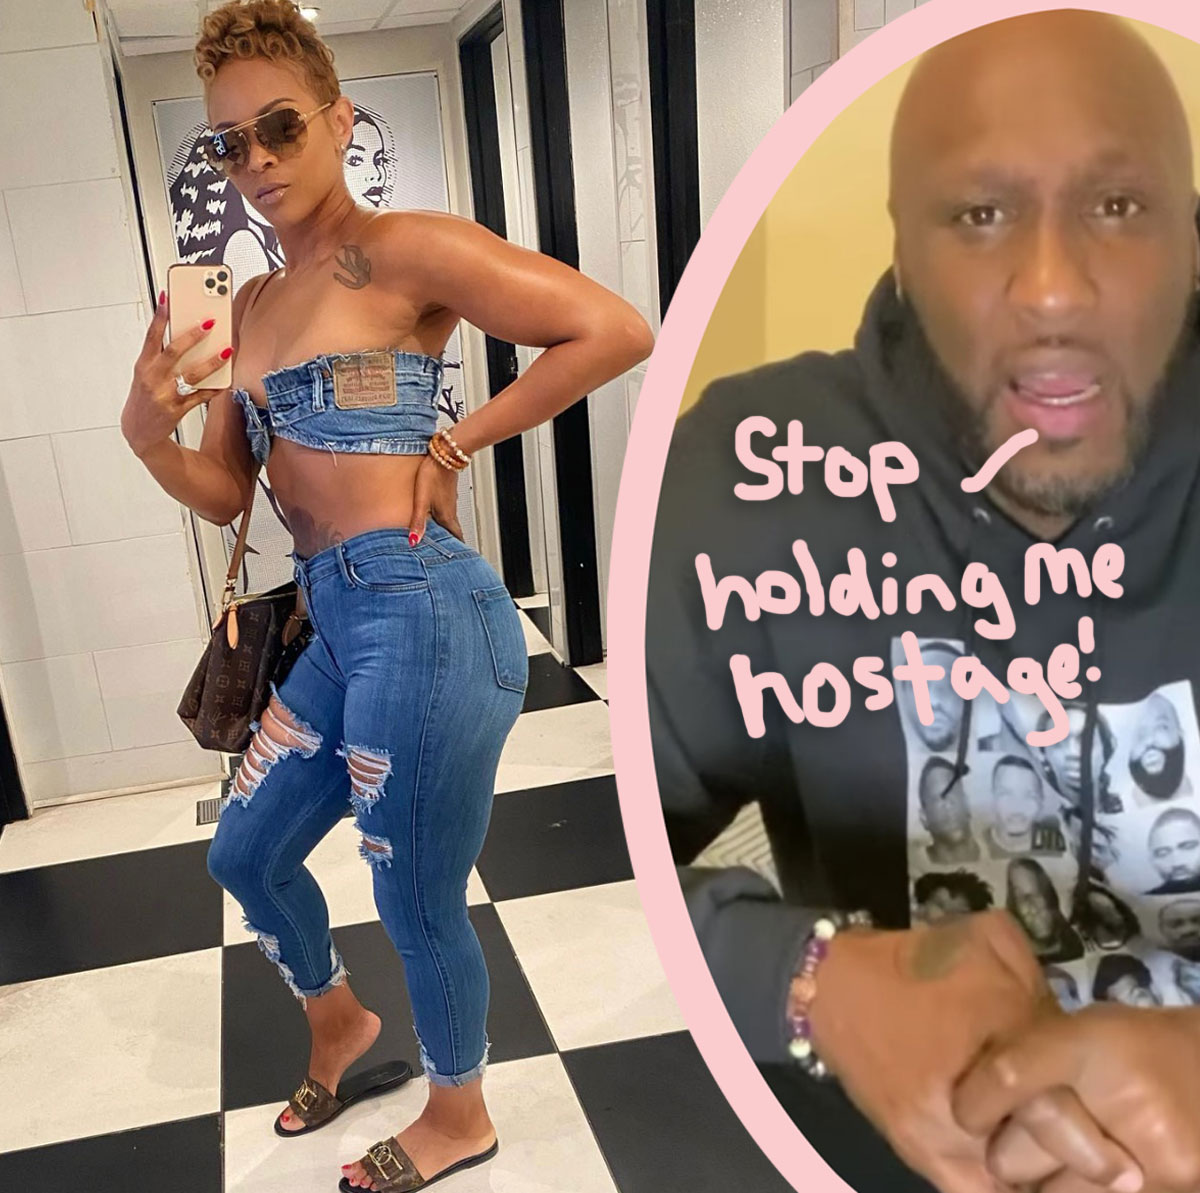 Lamar Odom Says Ex Sabrina Parr Is Holding His Social Media Accounts Hostage Real Raw News Today